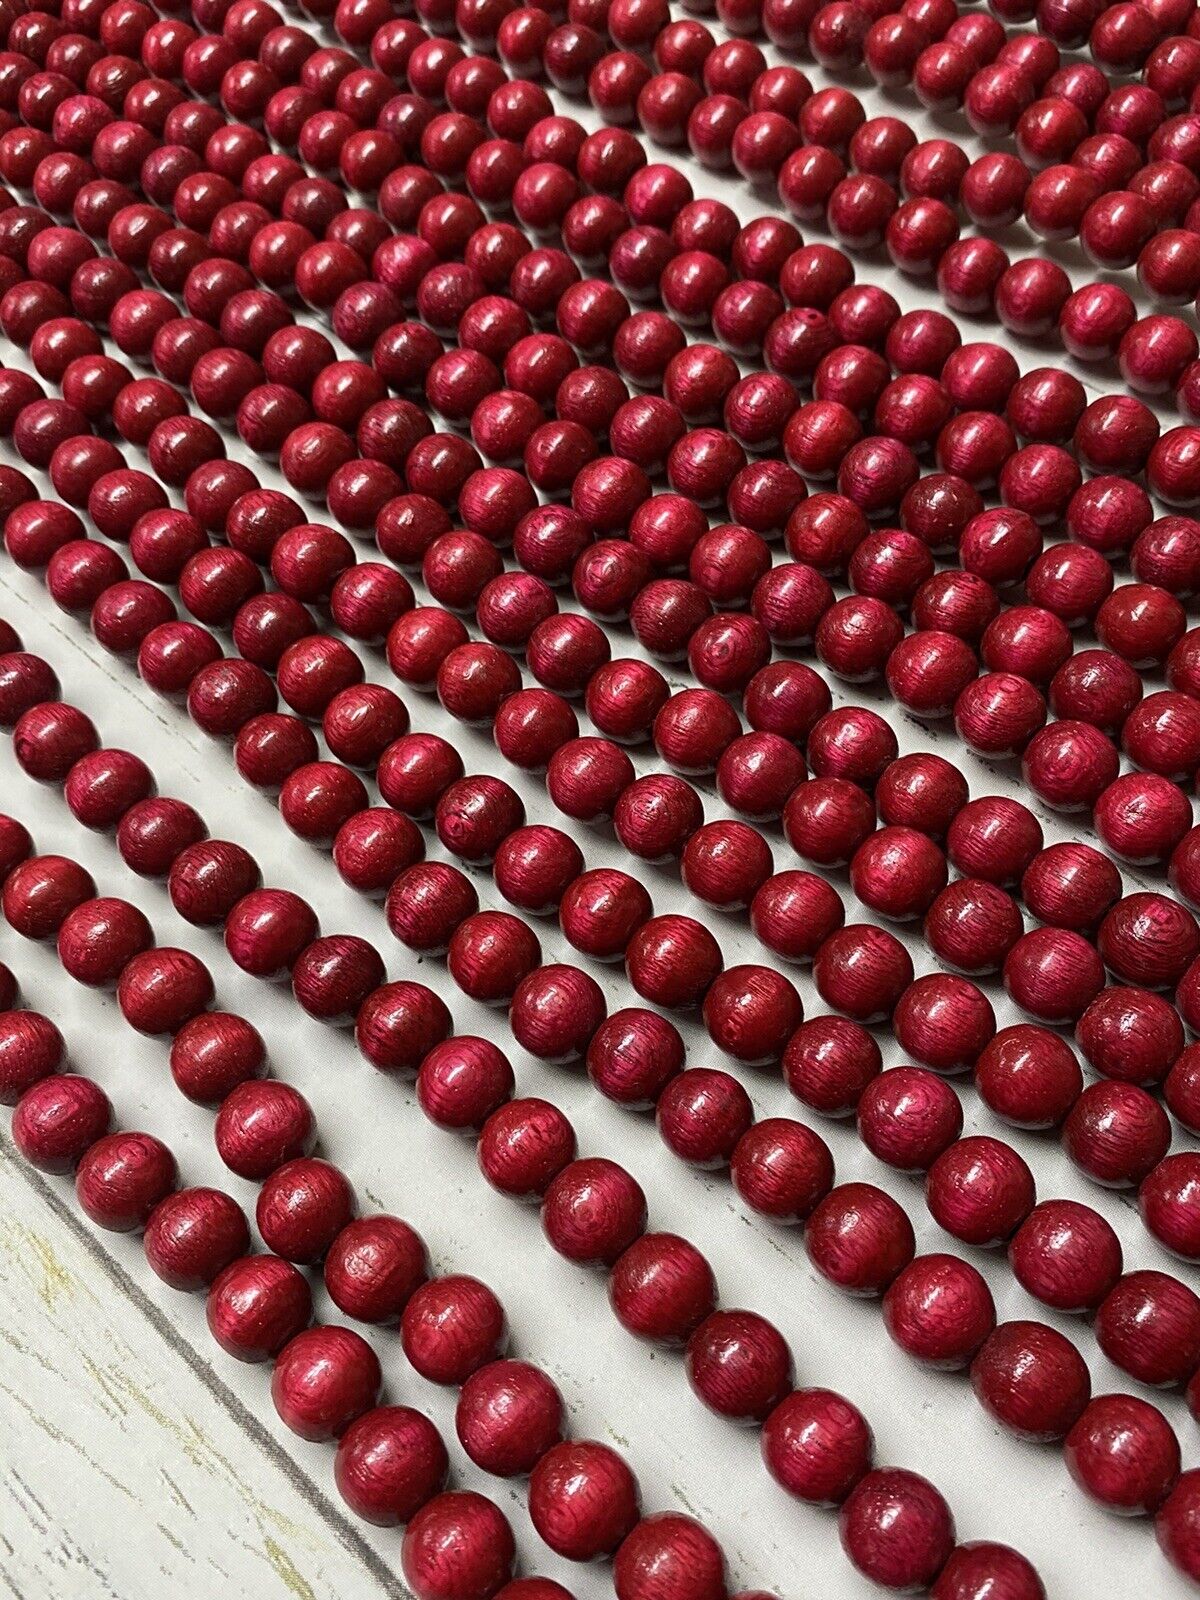 10 Vintage Christmas Tree Garlands, Red Wooden Cranberry Beads 9' each 90’ total